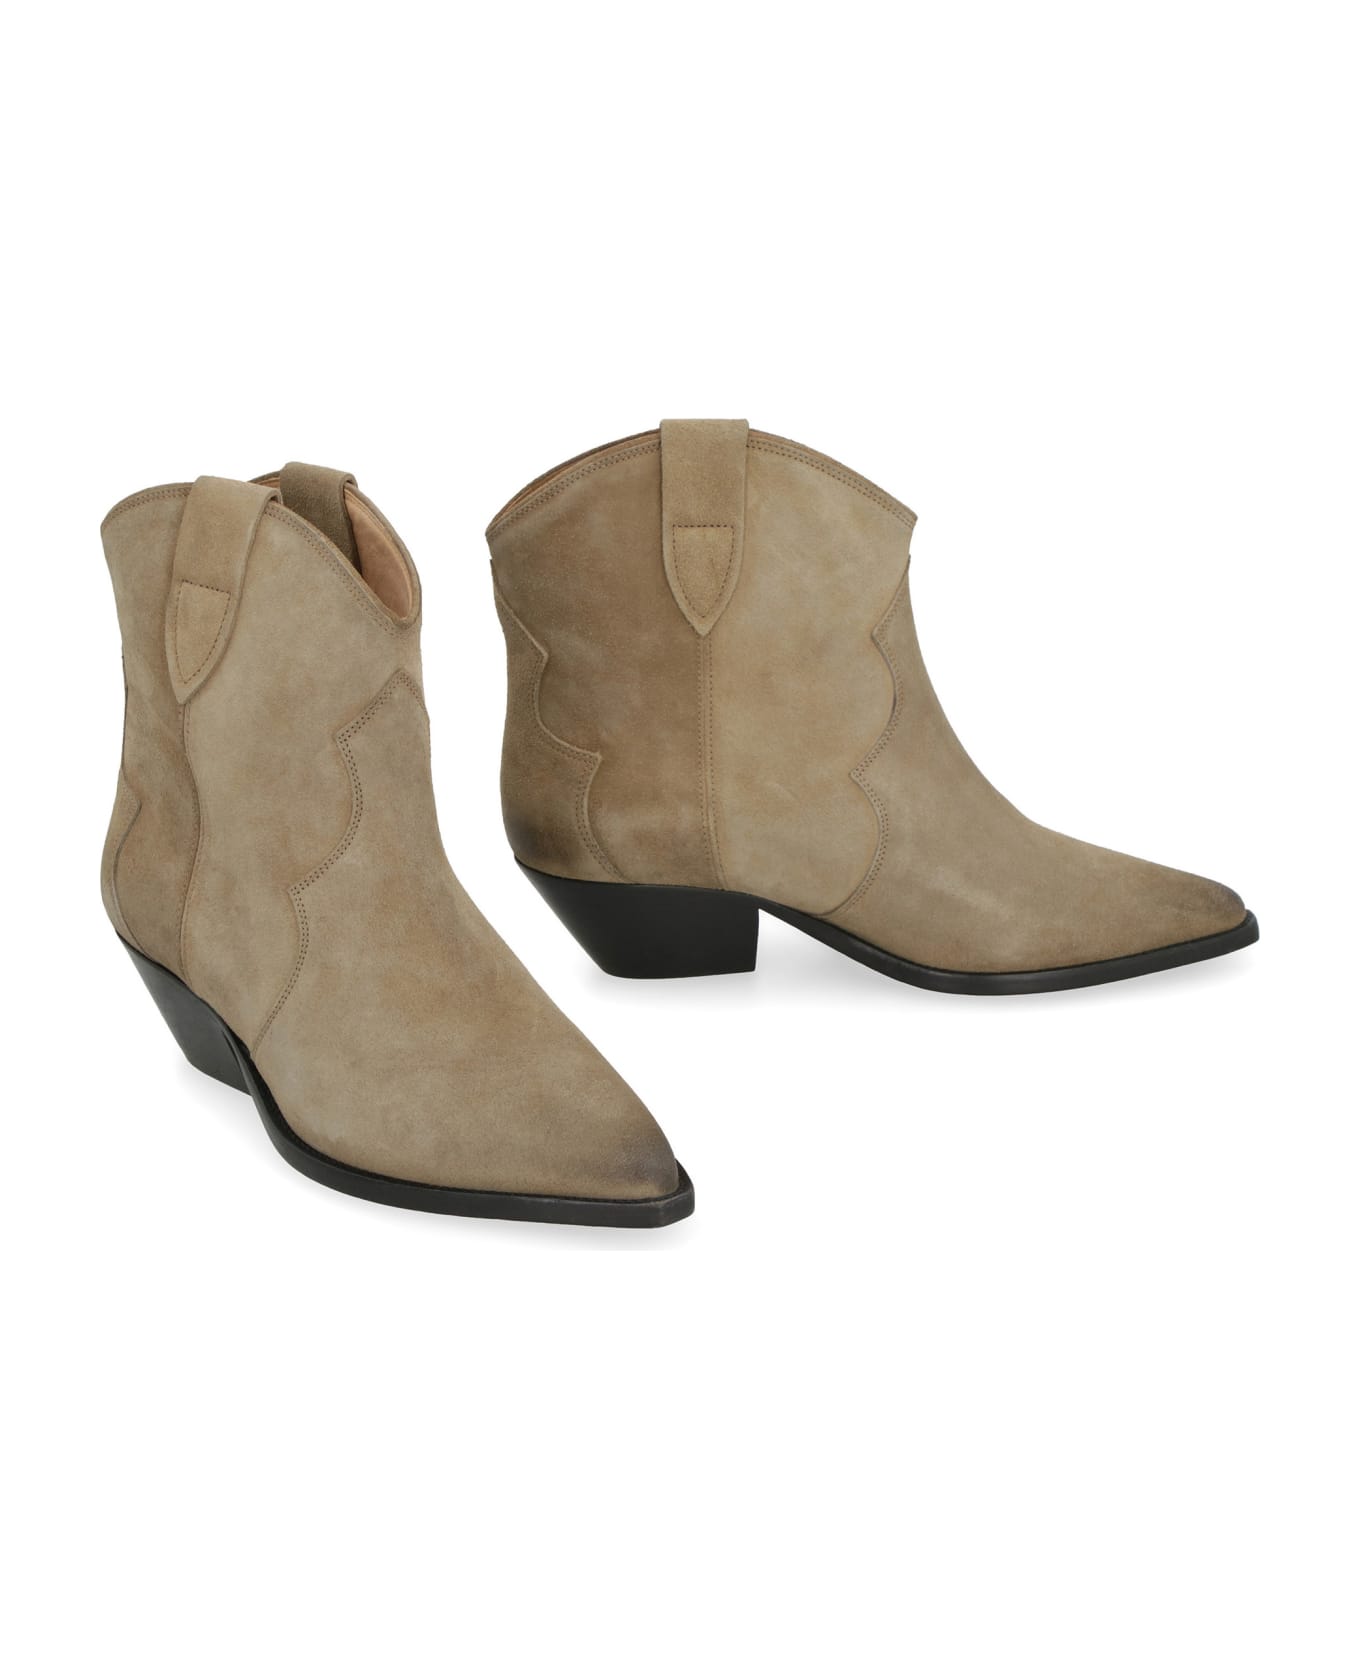 Isabel Marant Dewina Suede Ankle Boots - Dove Grey